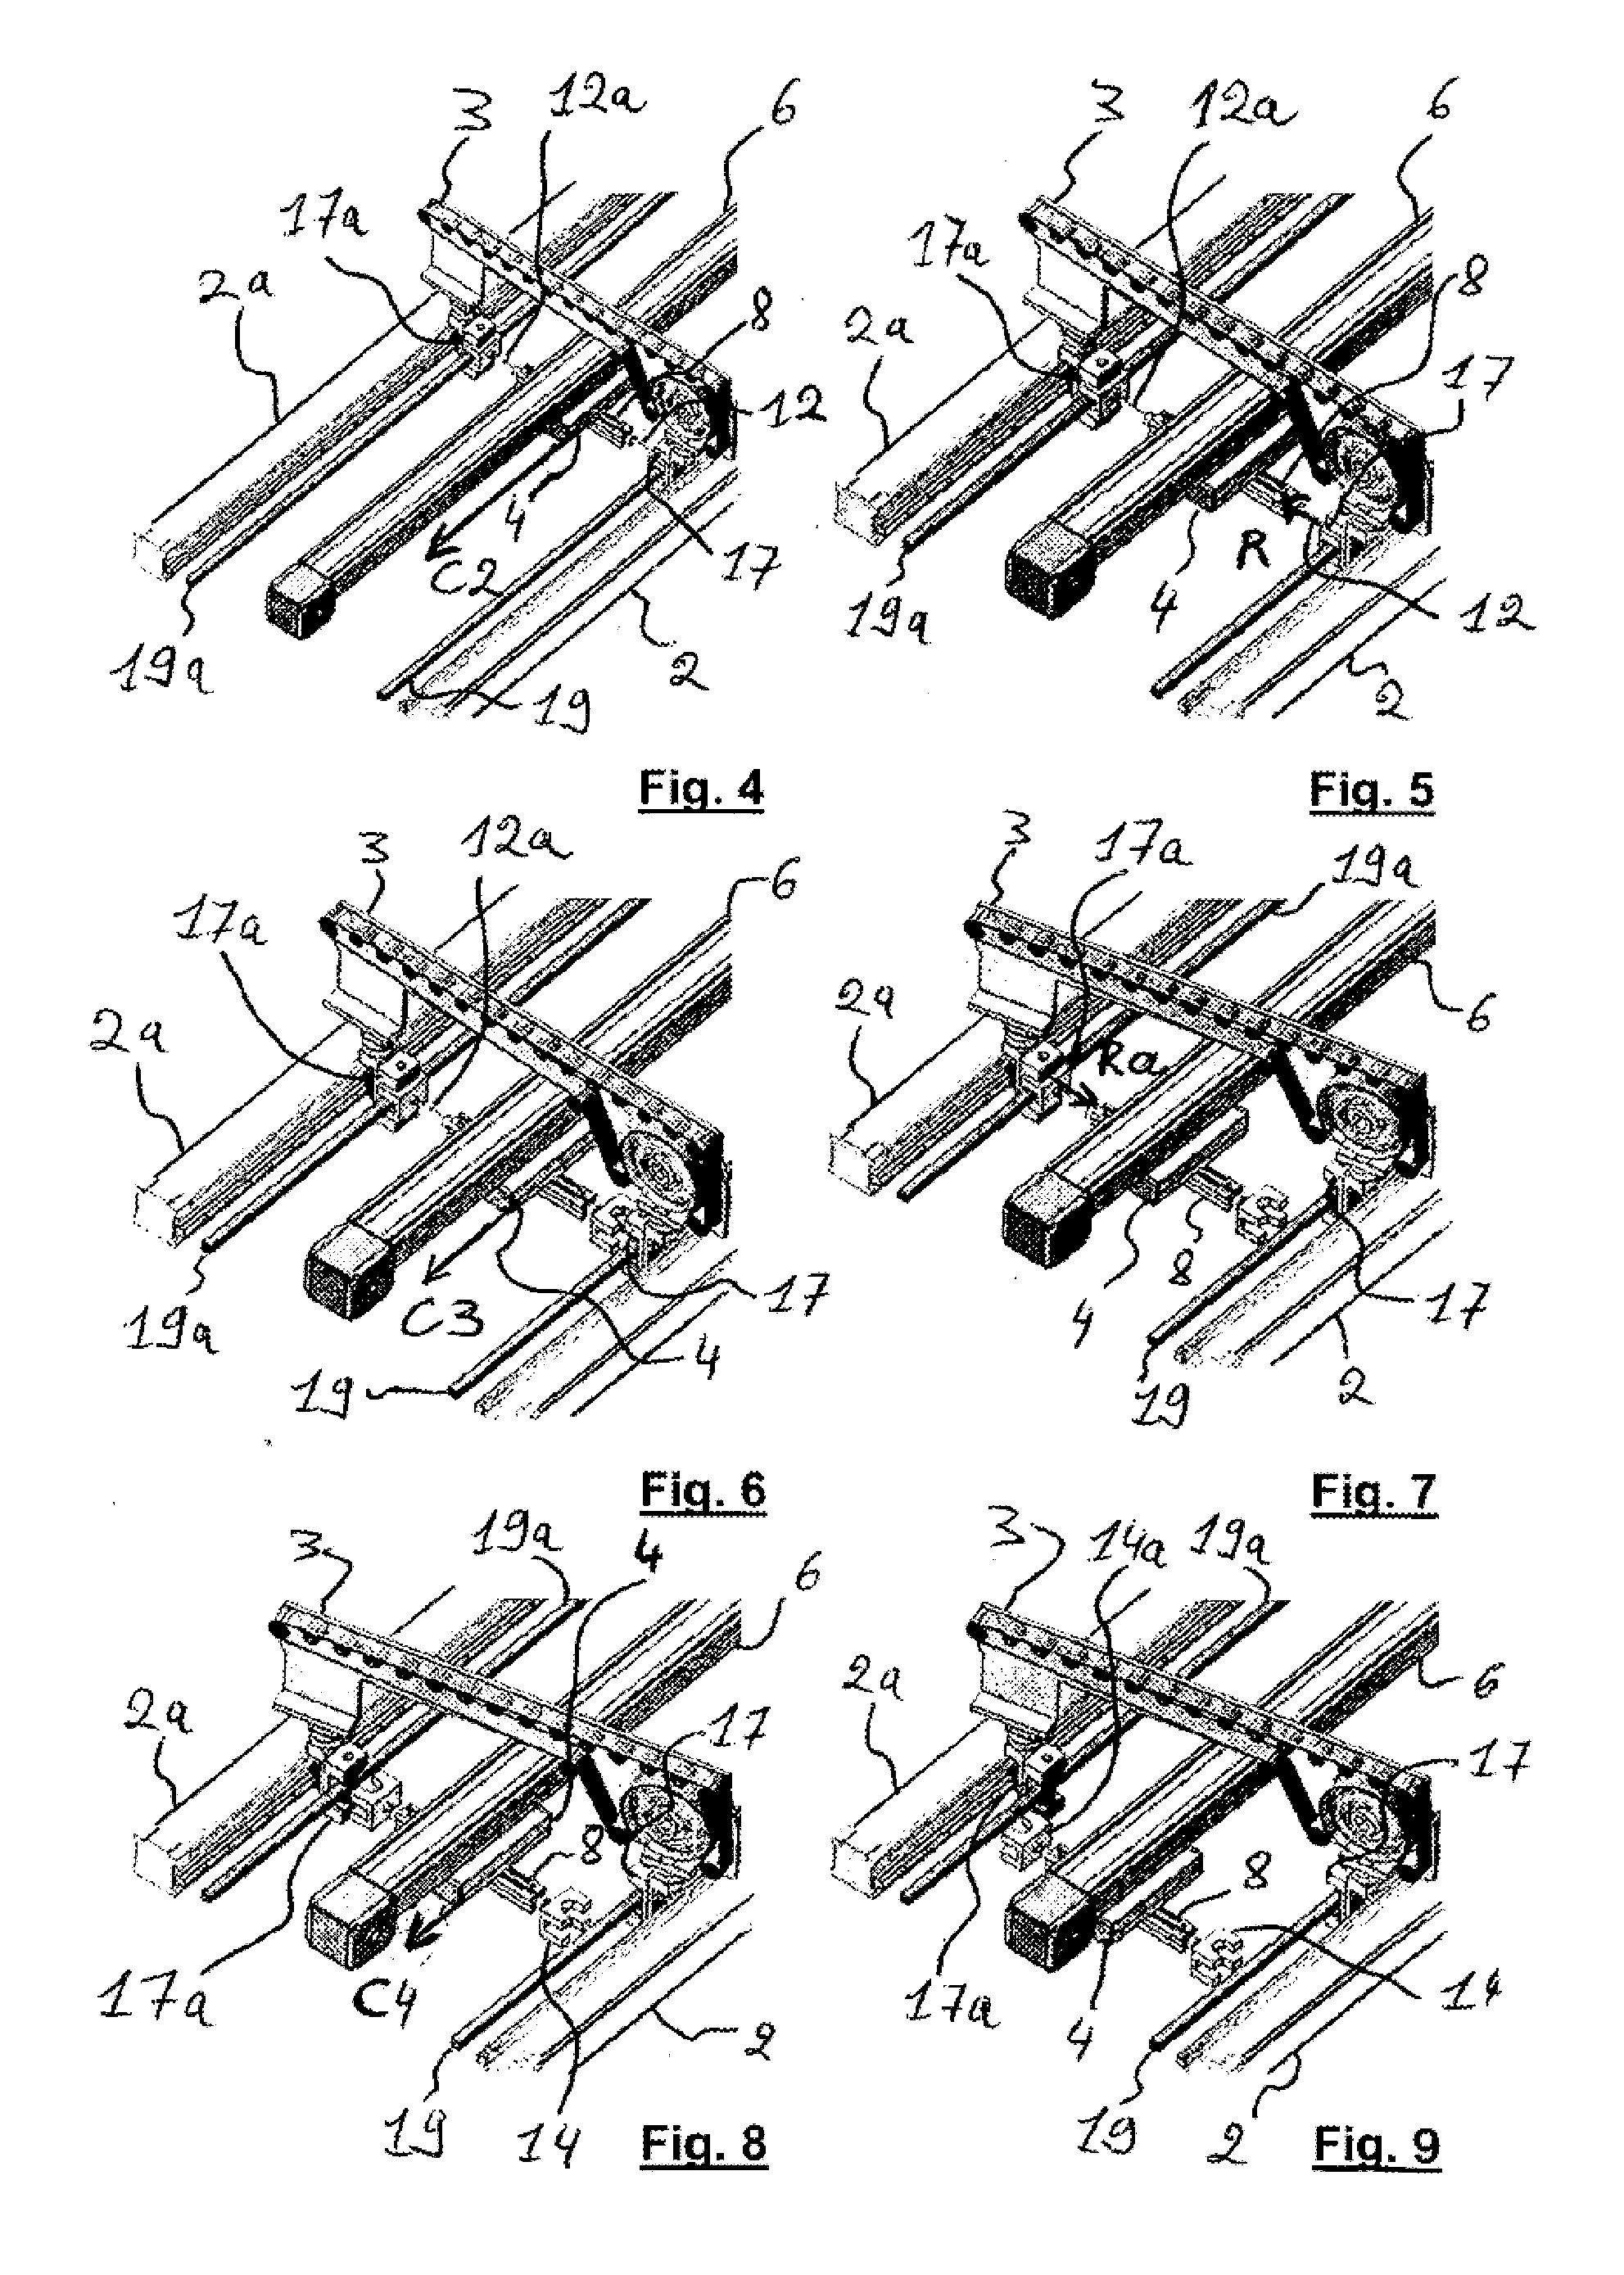 Unit for separating a pre-cut substrate positioned downstream from a cutting unit